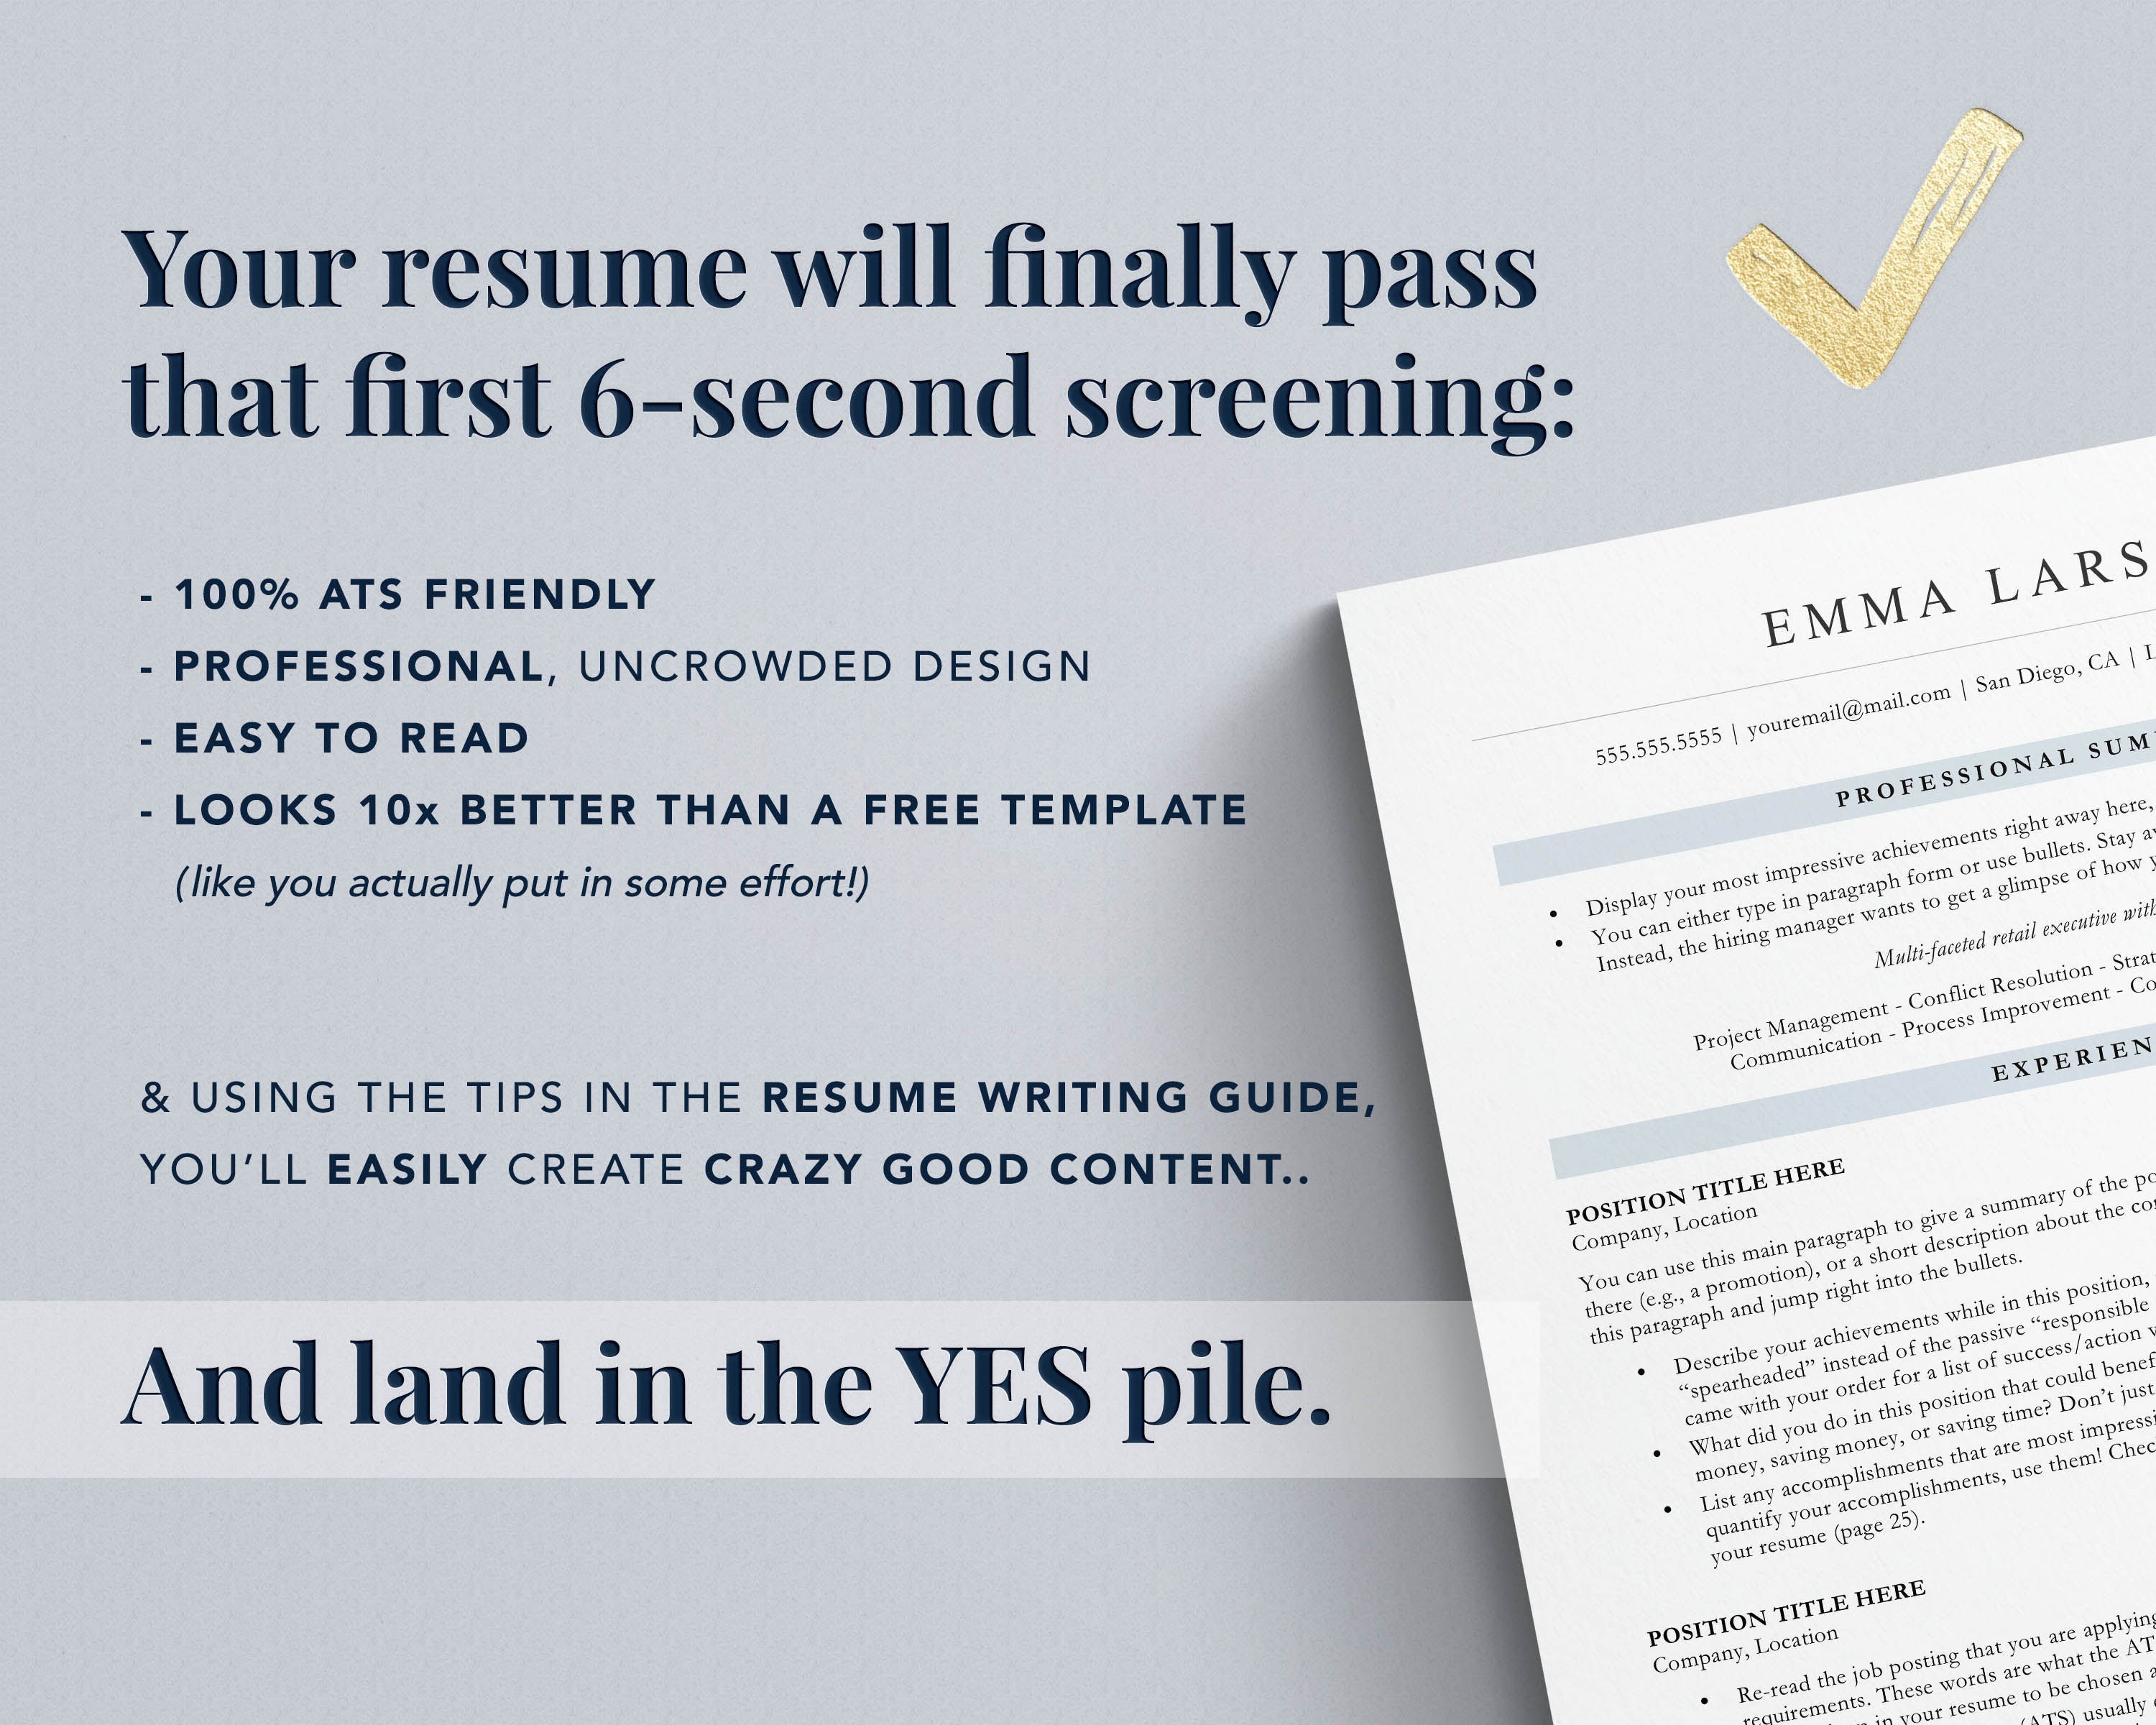 How to pass the ATS screening resume